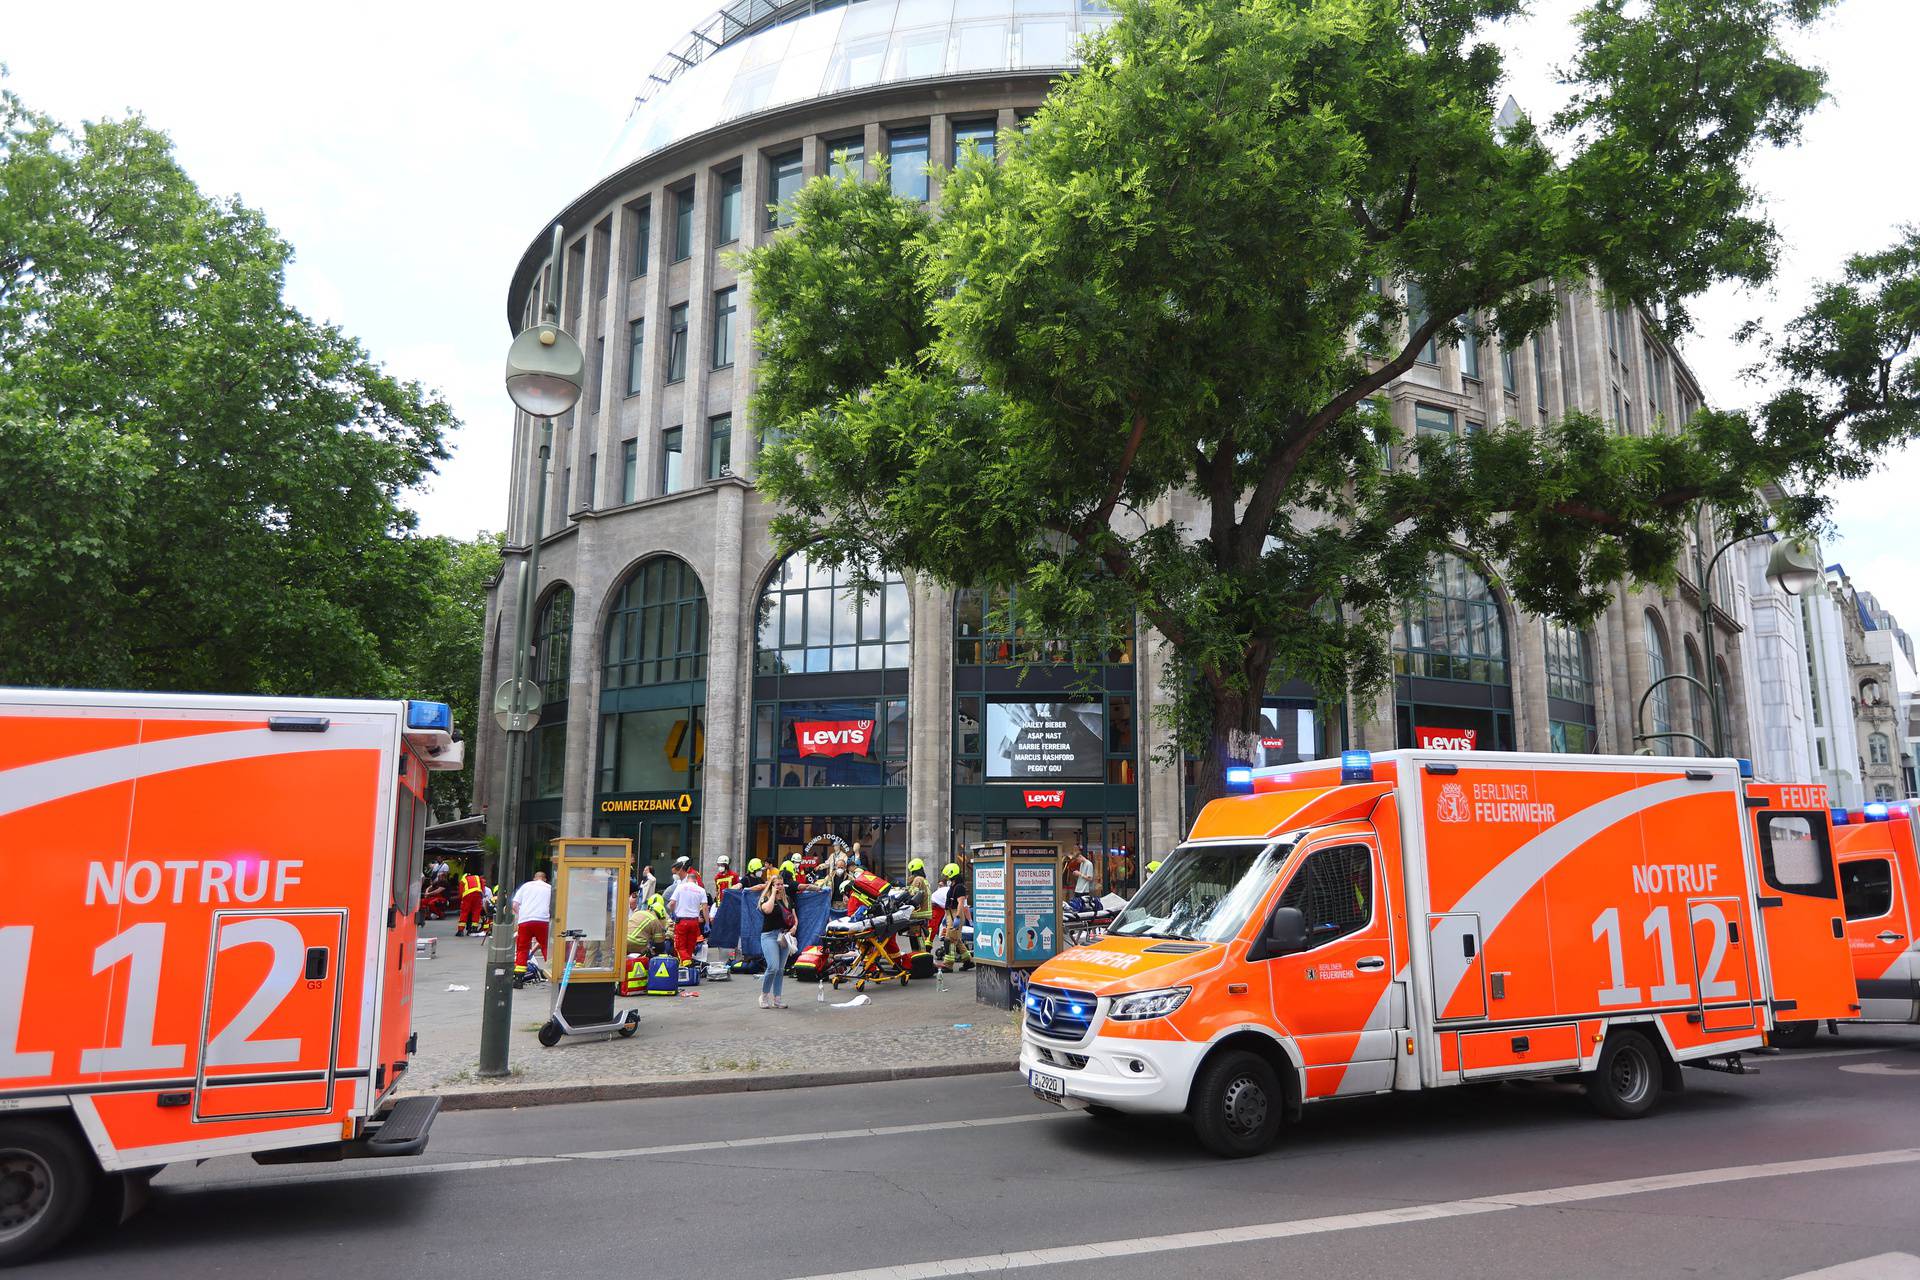 Car crashes into group of people in Berlin